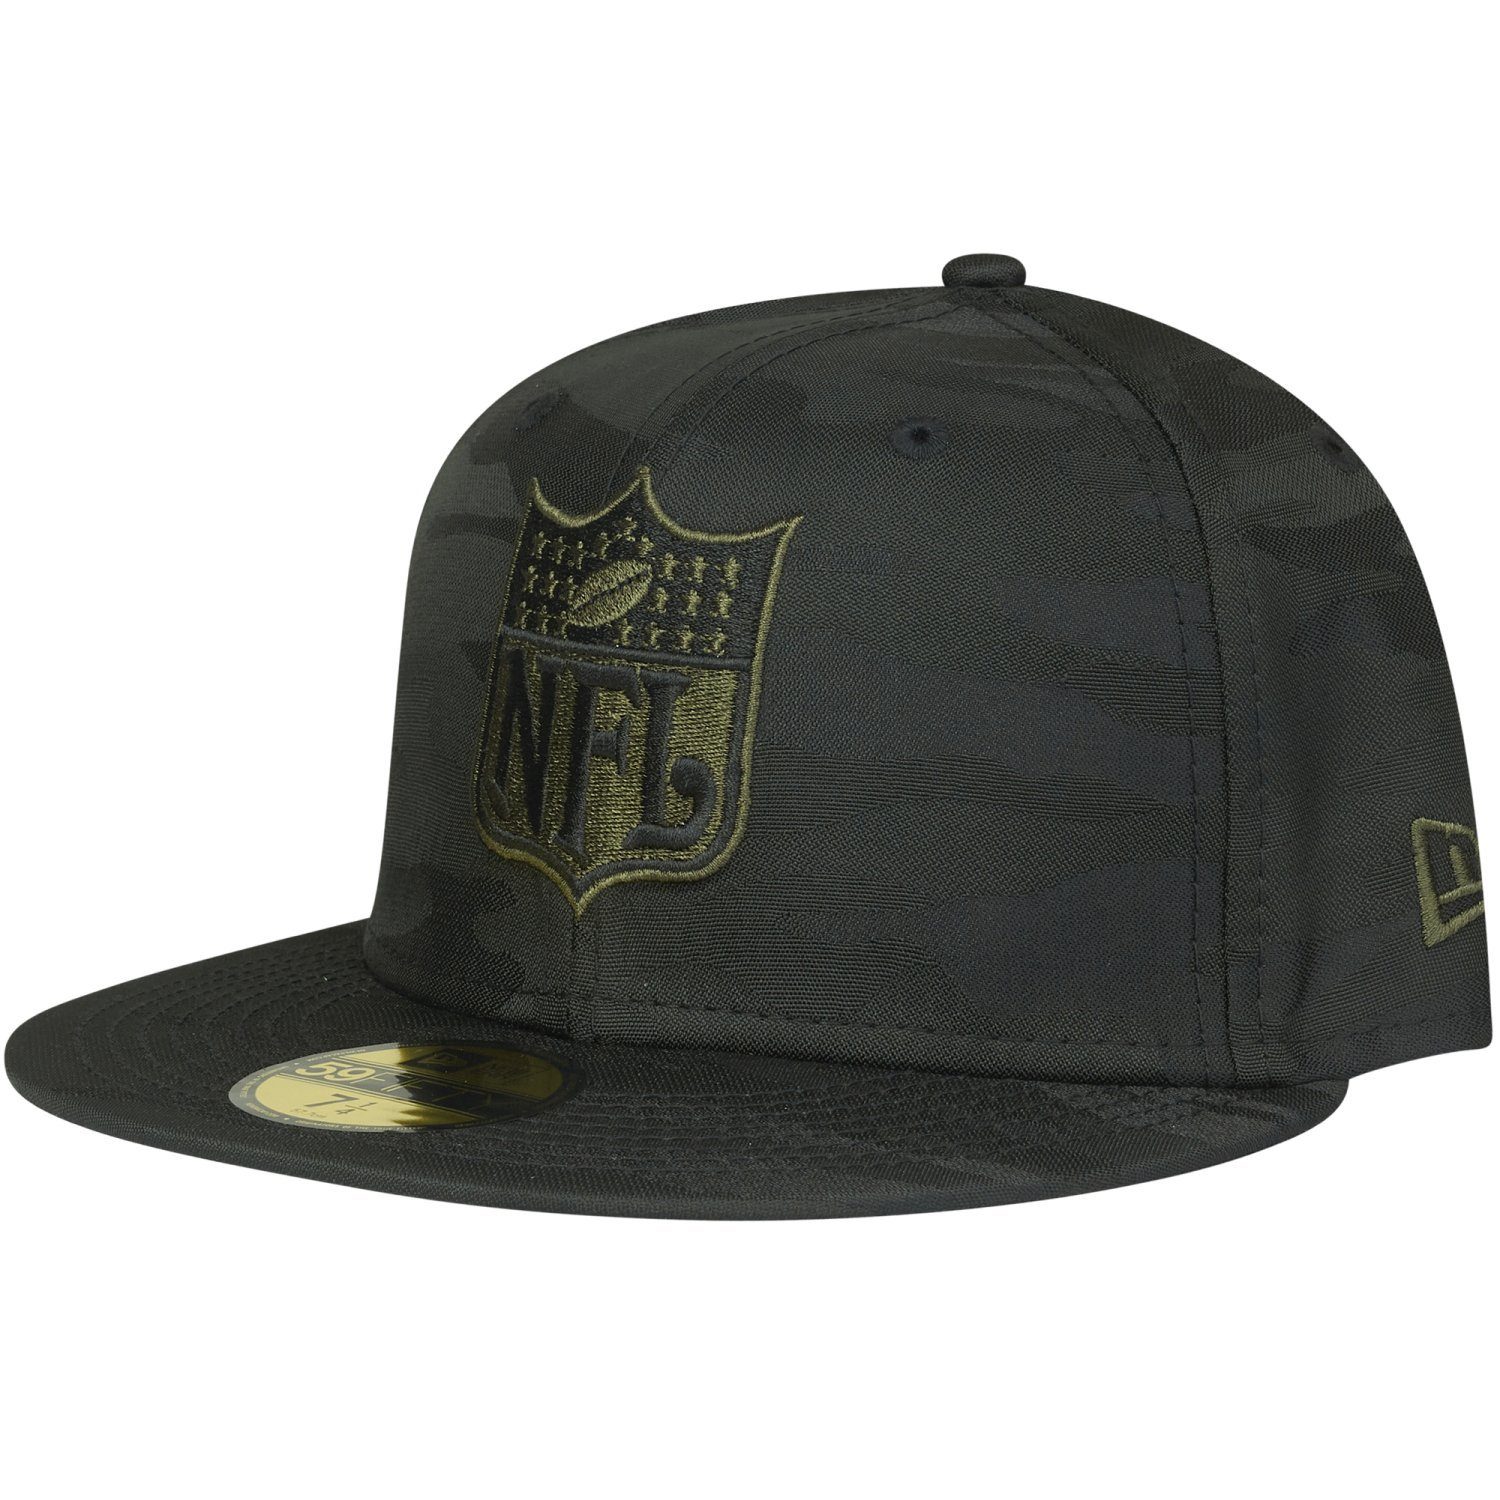 New Era Fitted Cap 59Fifty NFL TEAMS alpine NFL Shield